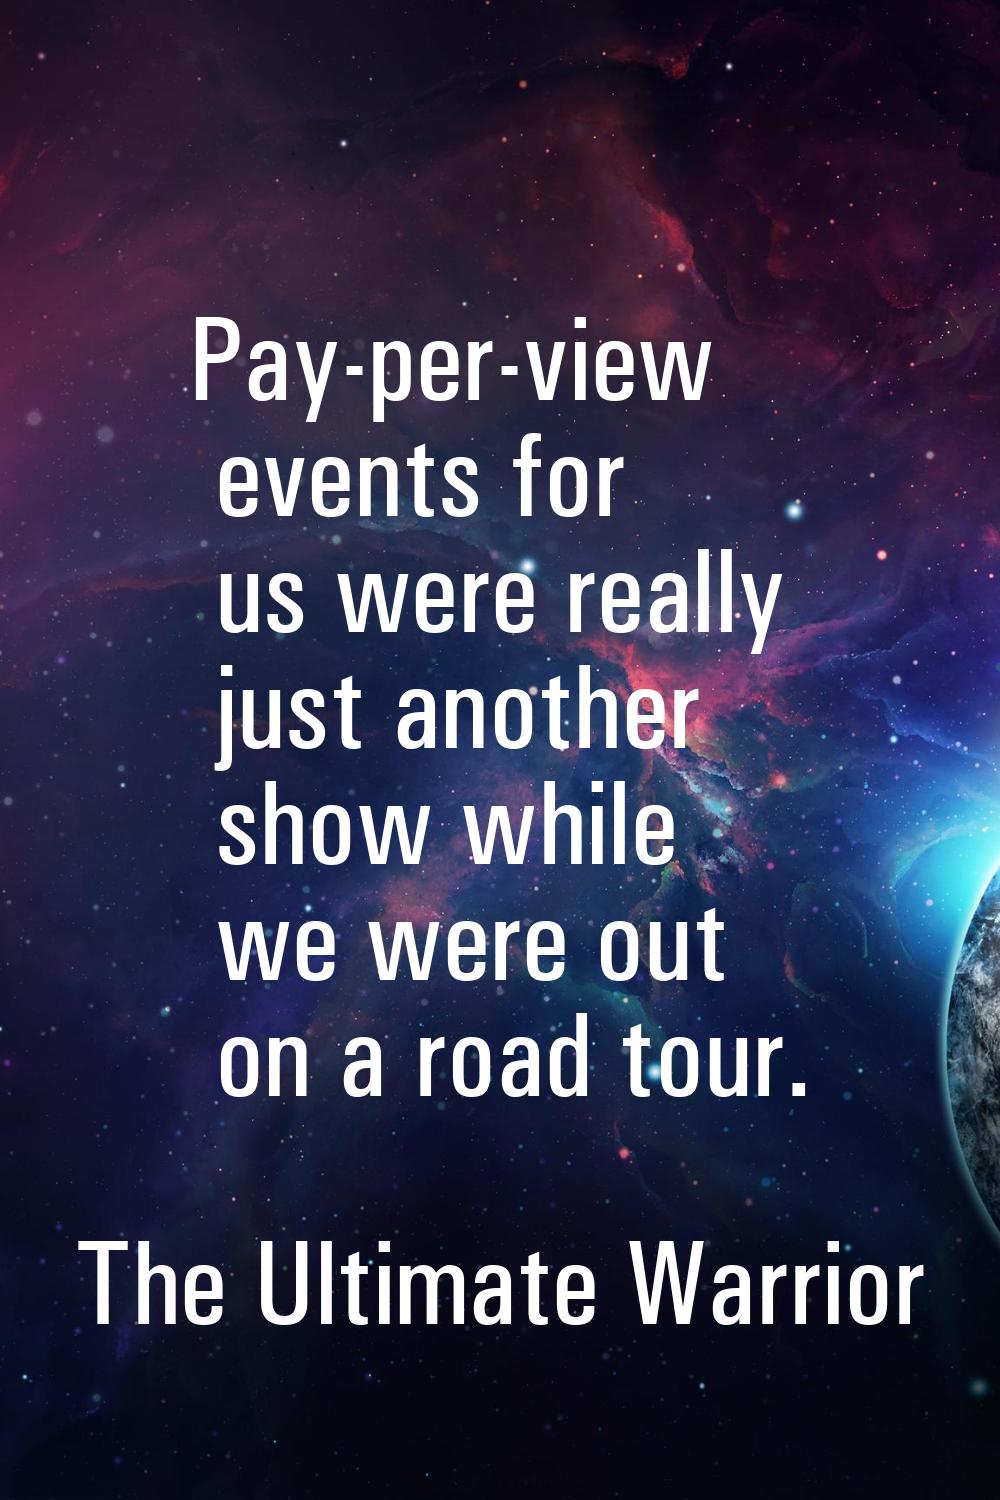 Pay-per-view events for us were really just another show while we were out on a road tour.